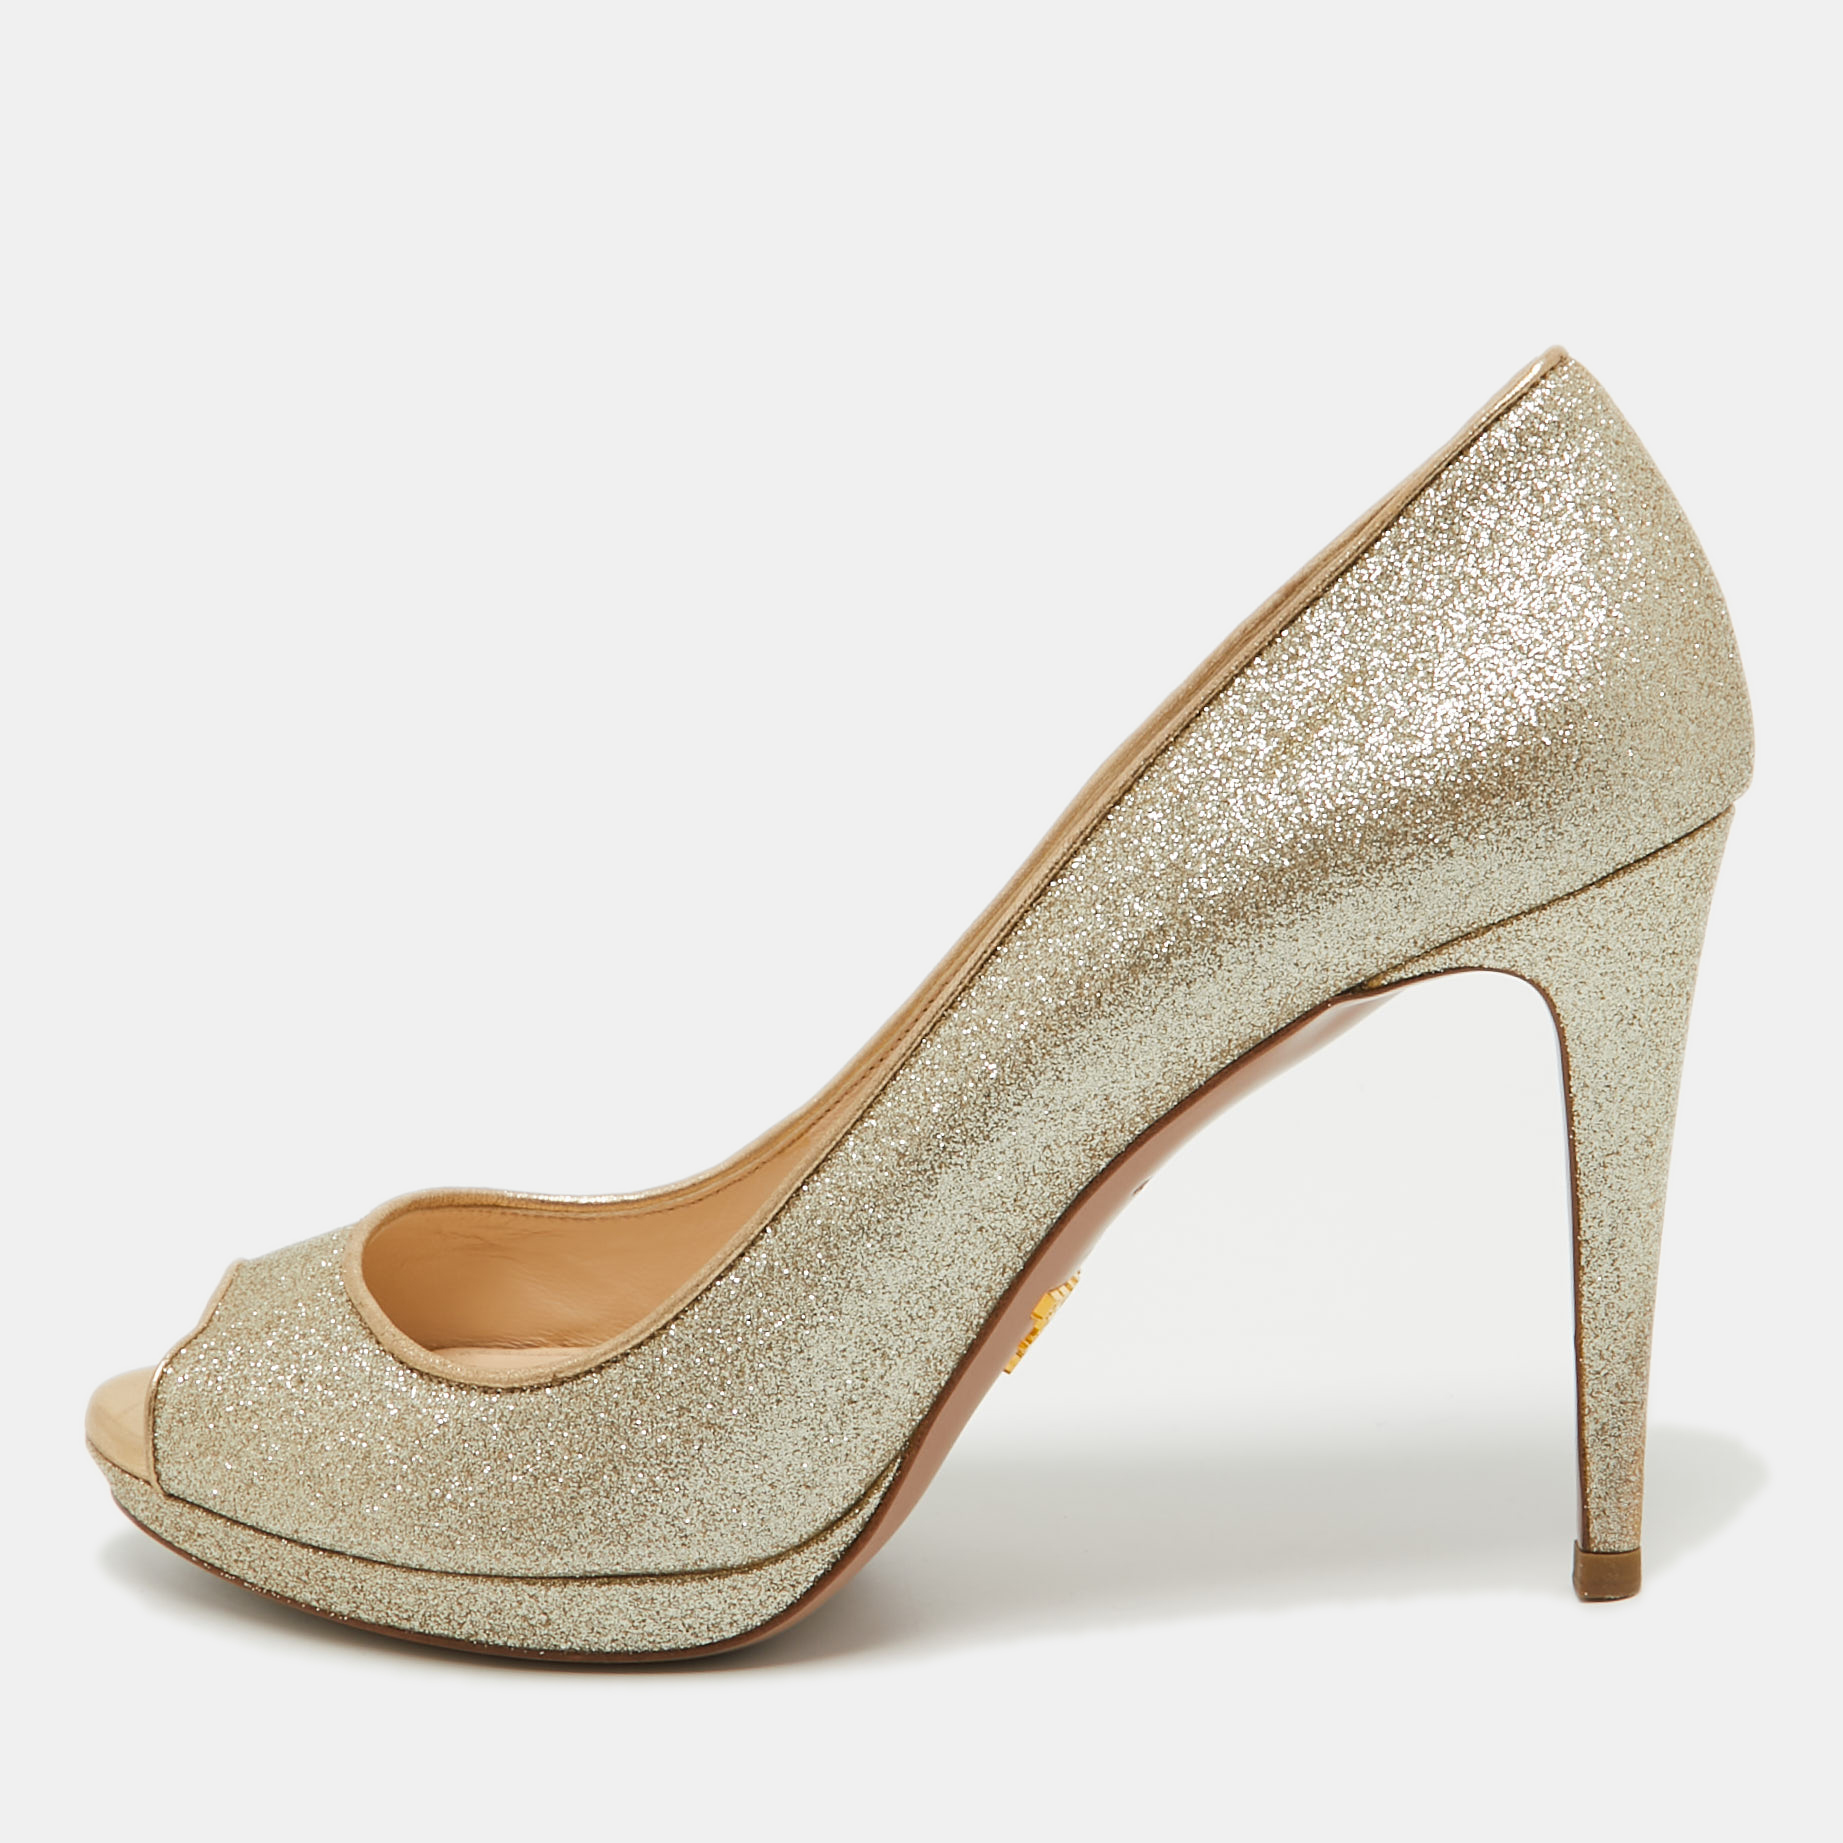 Beautifully designed this pair of pumps features a beautiful metallic gold glitter body. They are designed by Prada to make you shine. The pumps feature peep toes leather insoles and 10.5cm heels supported by platforms. Grab these classic pumps now